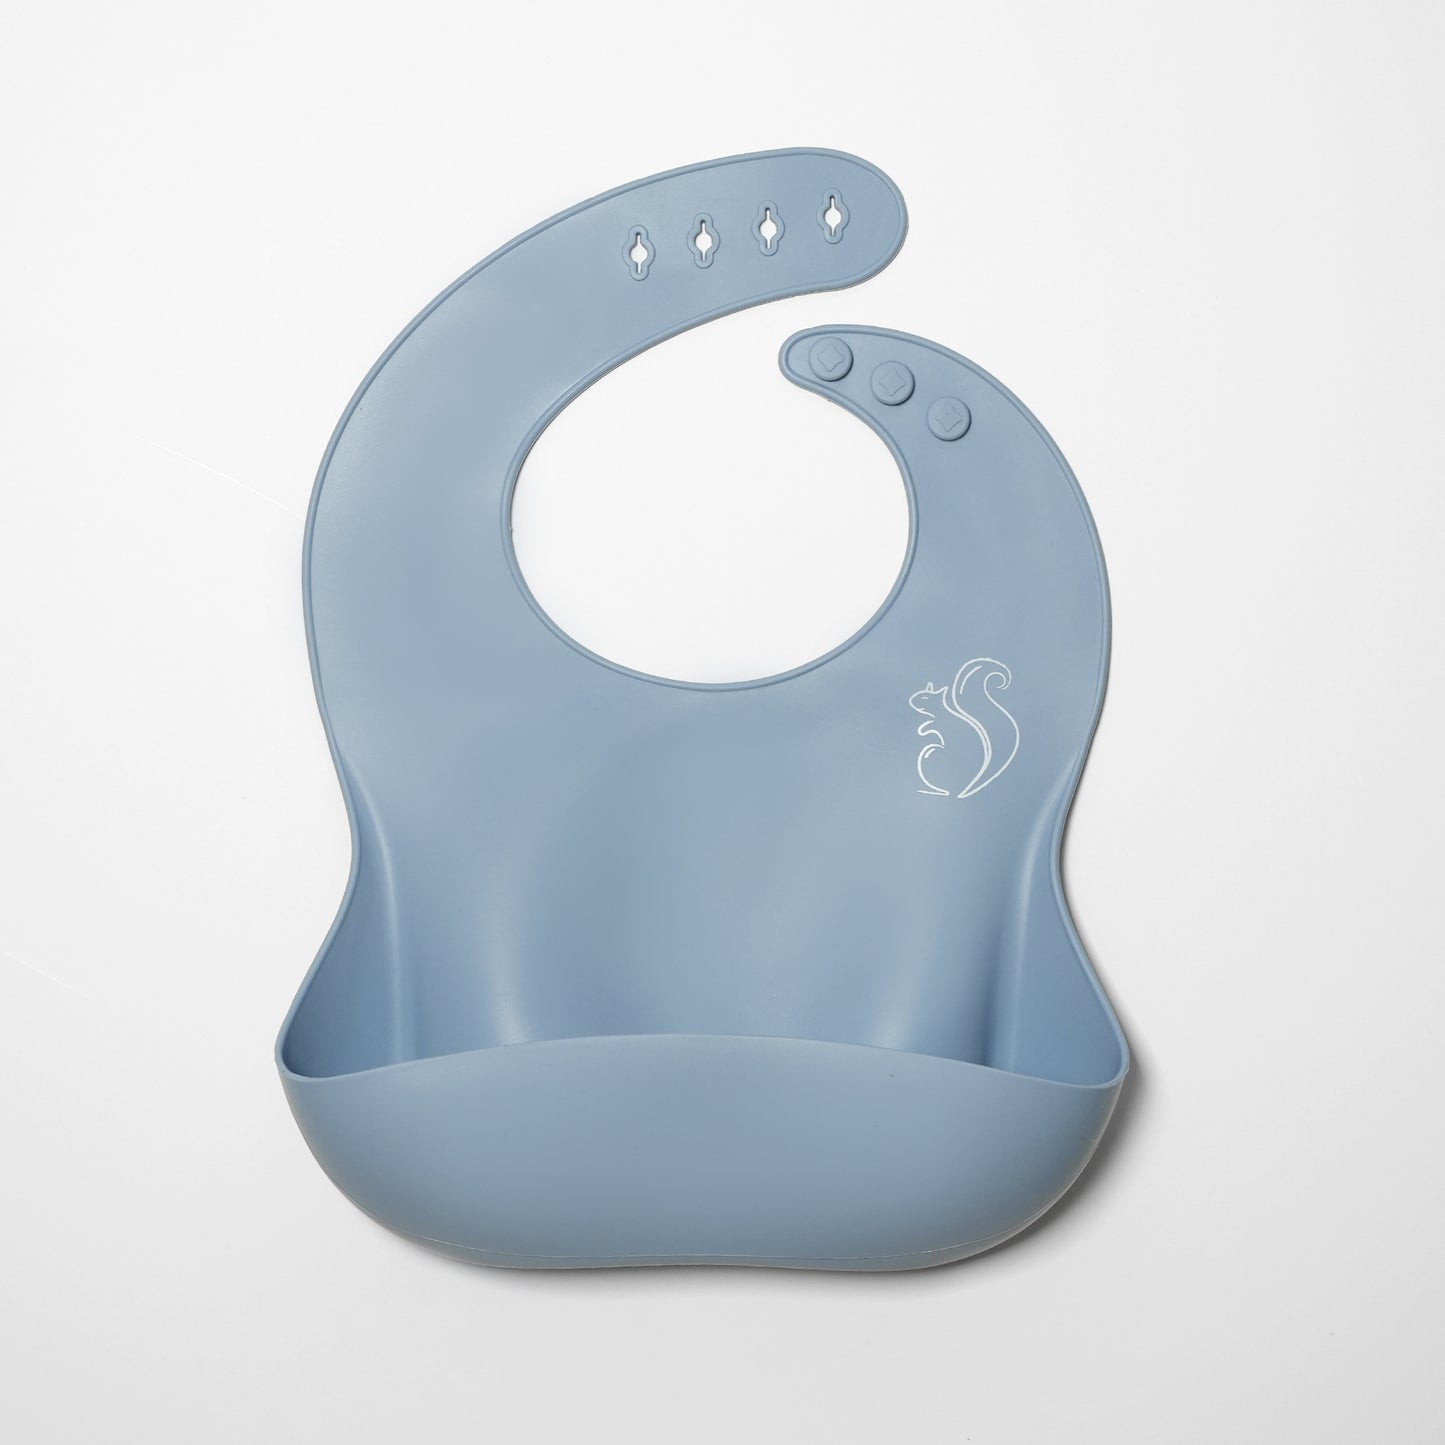 Nibble and Rest Silicone Bib